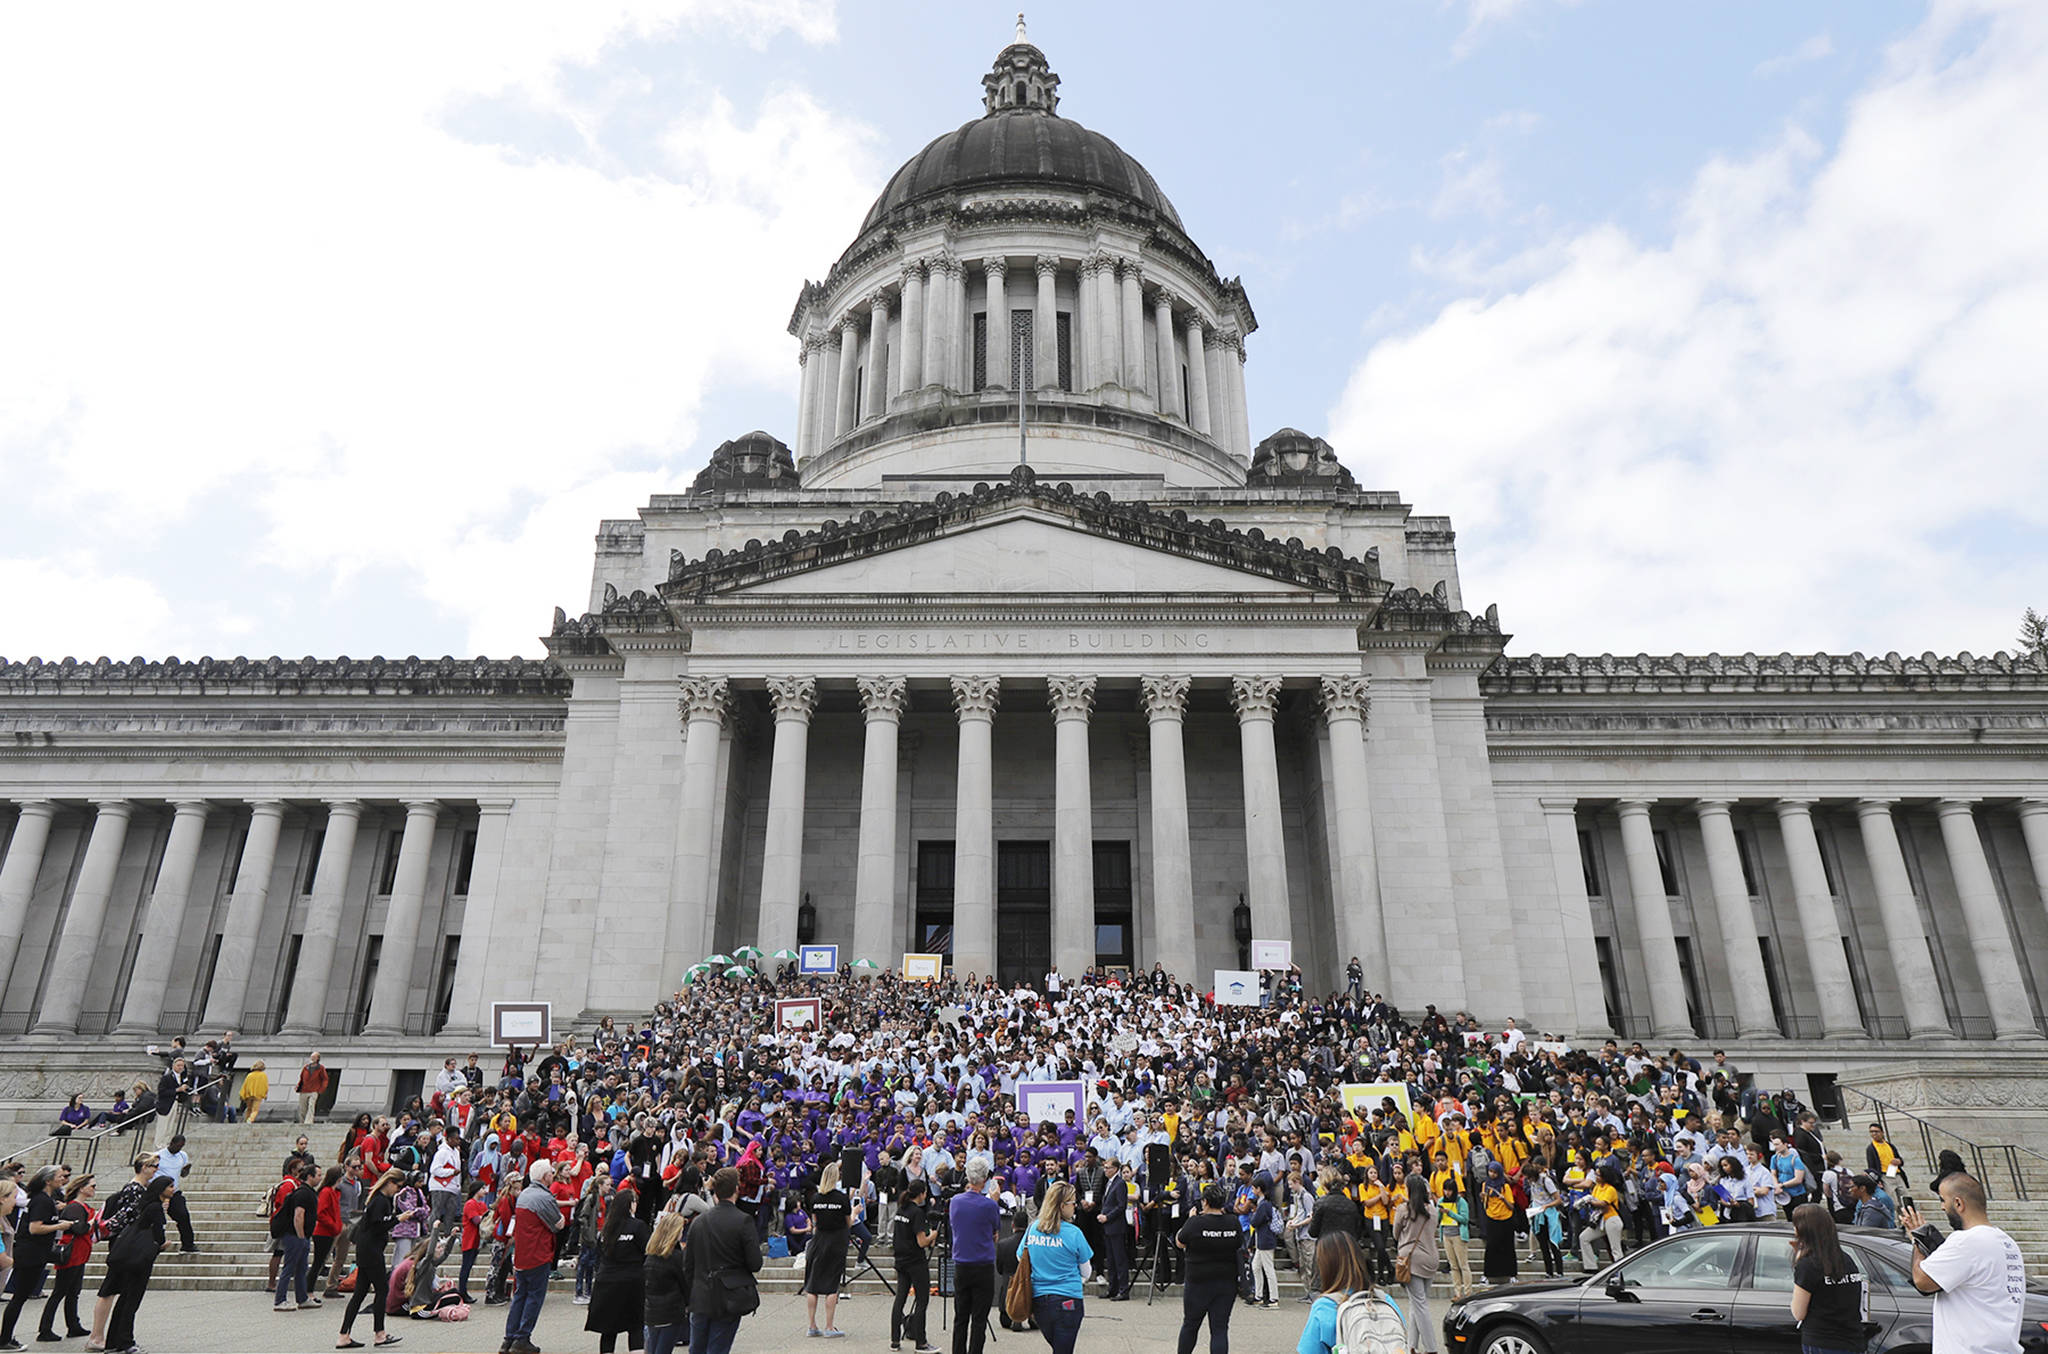 Hundreds of charter school students, teachers, and supporters rally at the Capitol in Olympia on Thursday. Teachers unions and other groups have sued over Washington state’s 2016 charter school law, which was enacted after the justices struck down the old law as unconstitutional. (AP Photo/Ted S. Warren)